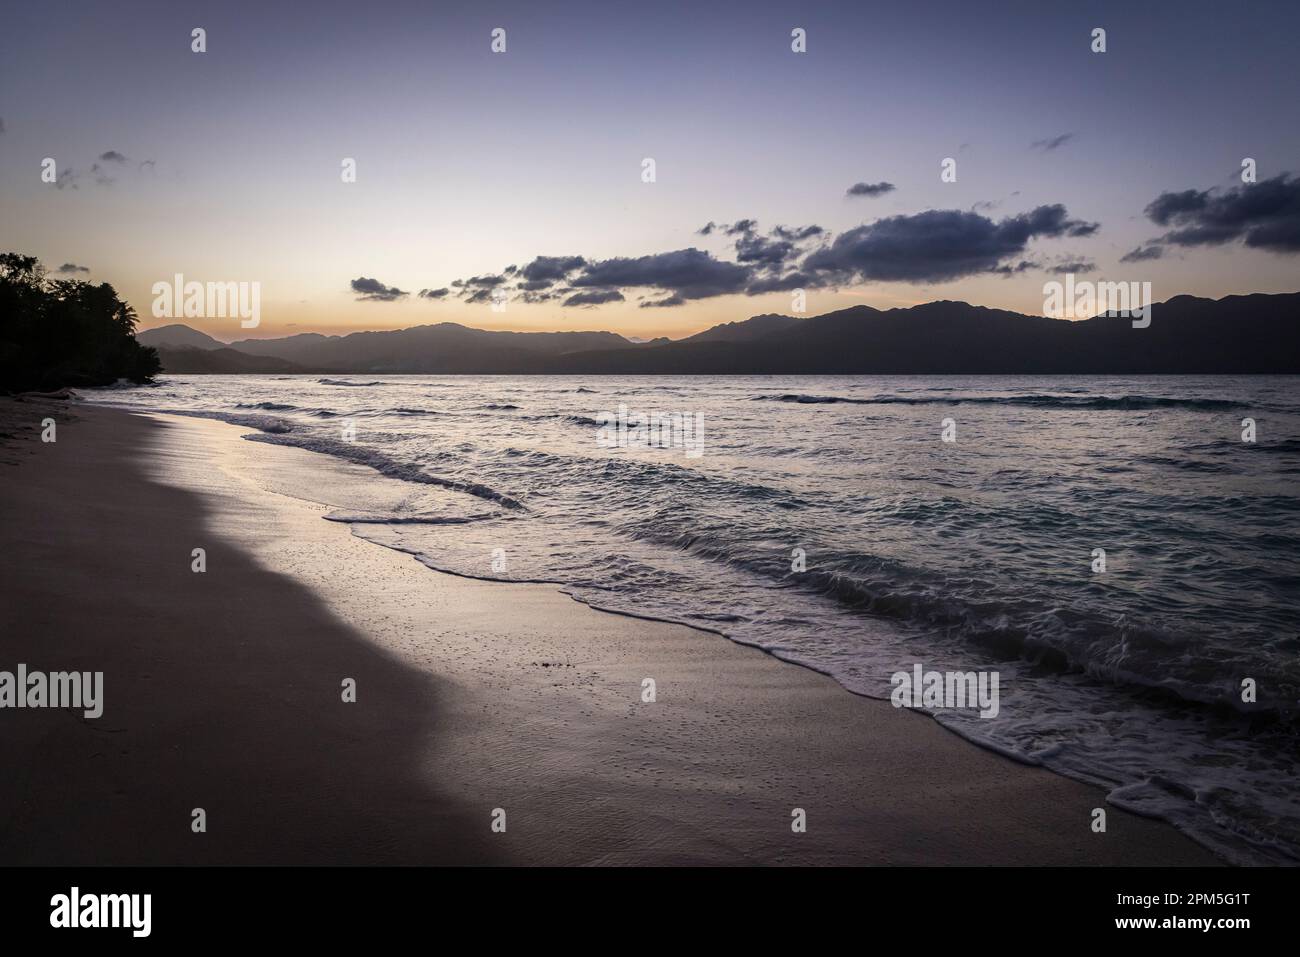 Carribean beach and waves at sunset with mountains in distance Stock Photo